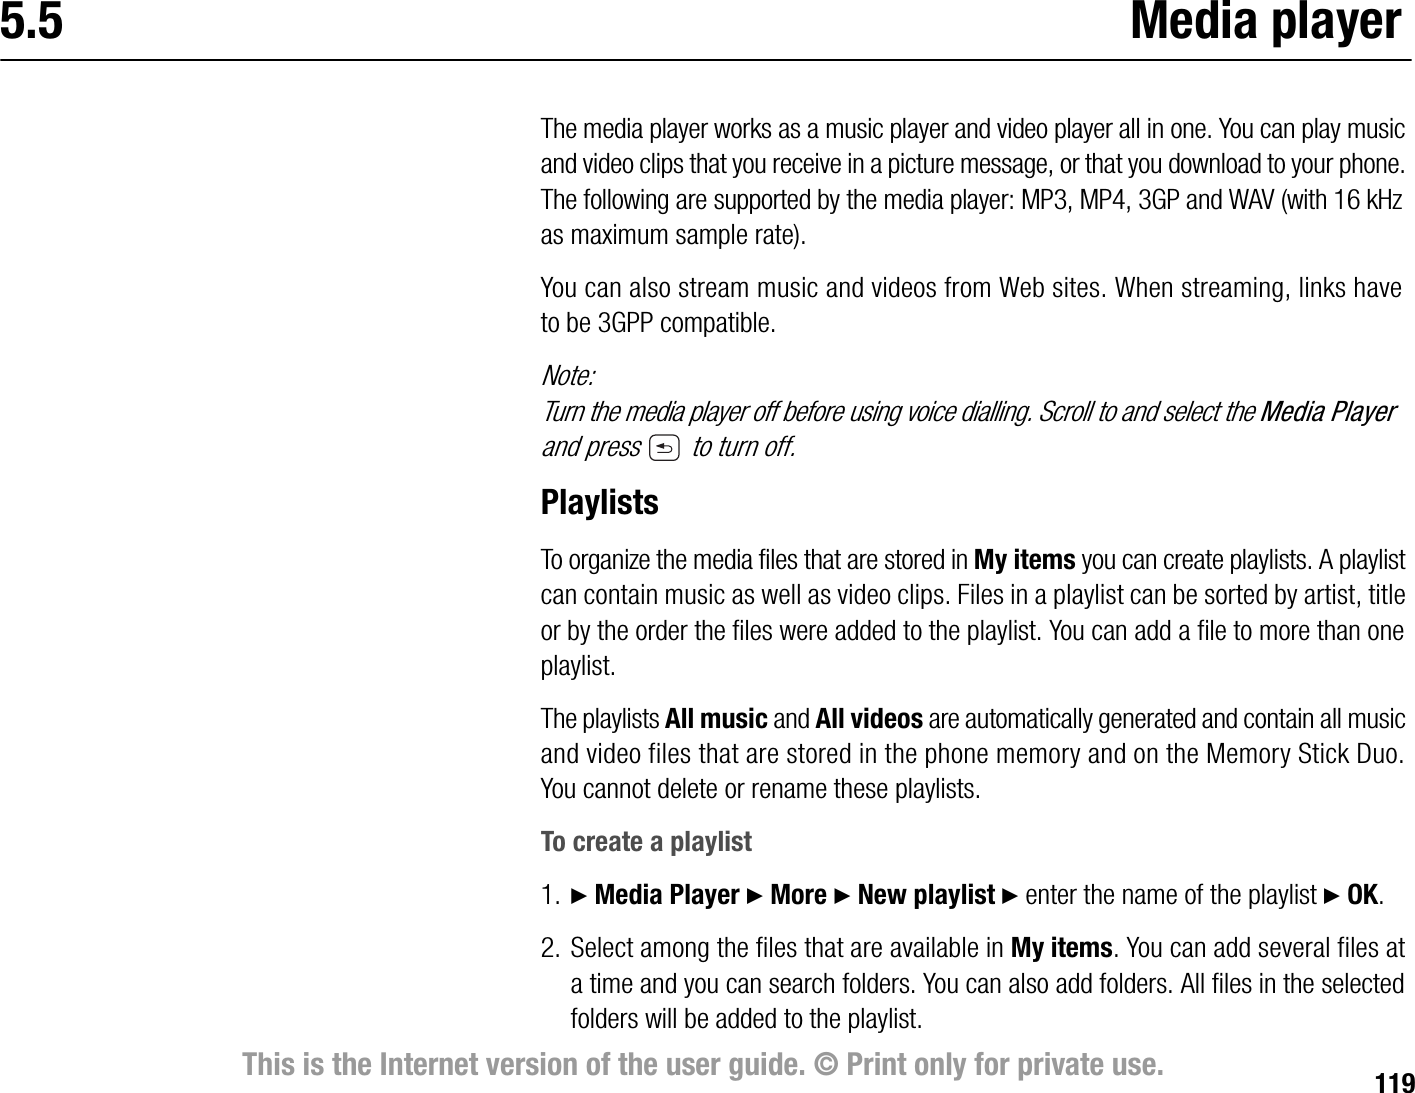 119This is the Internet version of the user guide. © Print only for private use.5.5 Media playerThe media player works as a music player and video player all in one. You can play music and video clips that you receive in a picture message, or that you download to your phone. The following are supported by the media player: MP3, MP4, 3GP and WAV (with 16 kHz as maximum sample rate).You can also stream music and videos from Web sites. When streaming, links have to be 3GPP compatible.Note:Turn the media player off before using voice dialling. Scroll to and select the Media Player and press   to turn off.PlaylistsTo organize the media files that are stored in My items you can create playlists. A playlist can contain music as well as video clips. Files in a playlist can be sorted by artist, title or by the order the files were added to the playlist. You can add a file to more than one playlist.The playlists All music and All videos are automatically generated and contain all music and video files that are stored in the phone memory and on the Memory Stick Duo. You cannot delete or rename these playlists.To create a playlist1. } Media Player } More } New playlist } enter the name of the playlist } OK.2. Select among the files that are available in My items. You can add several files at a time and you can search folders. You can also add folders. All files in the selected folders will be added to the playlist.